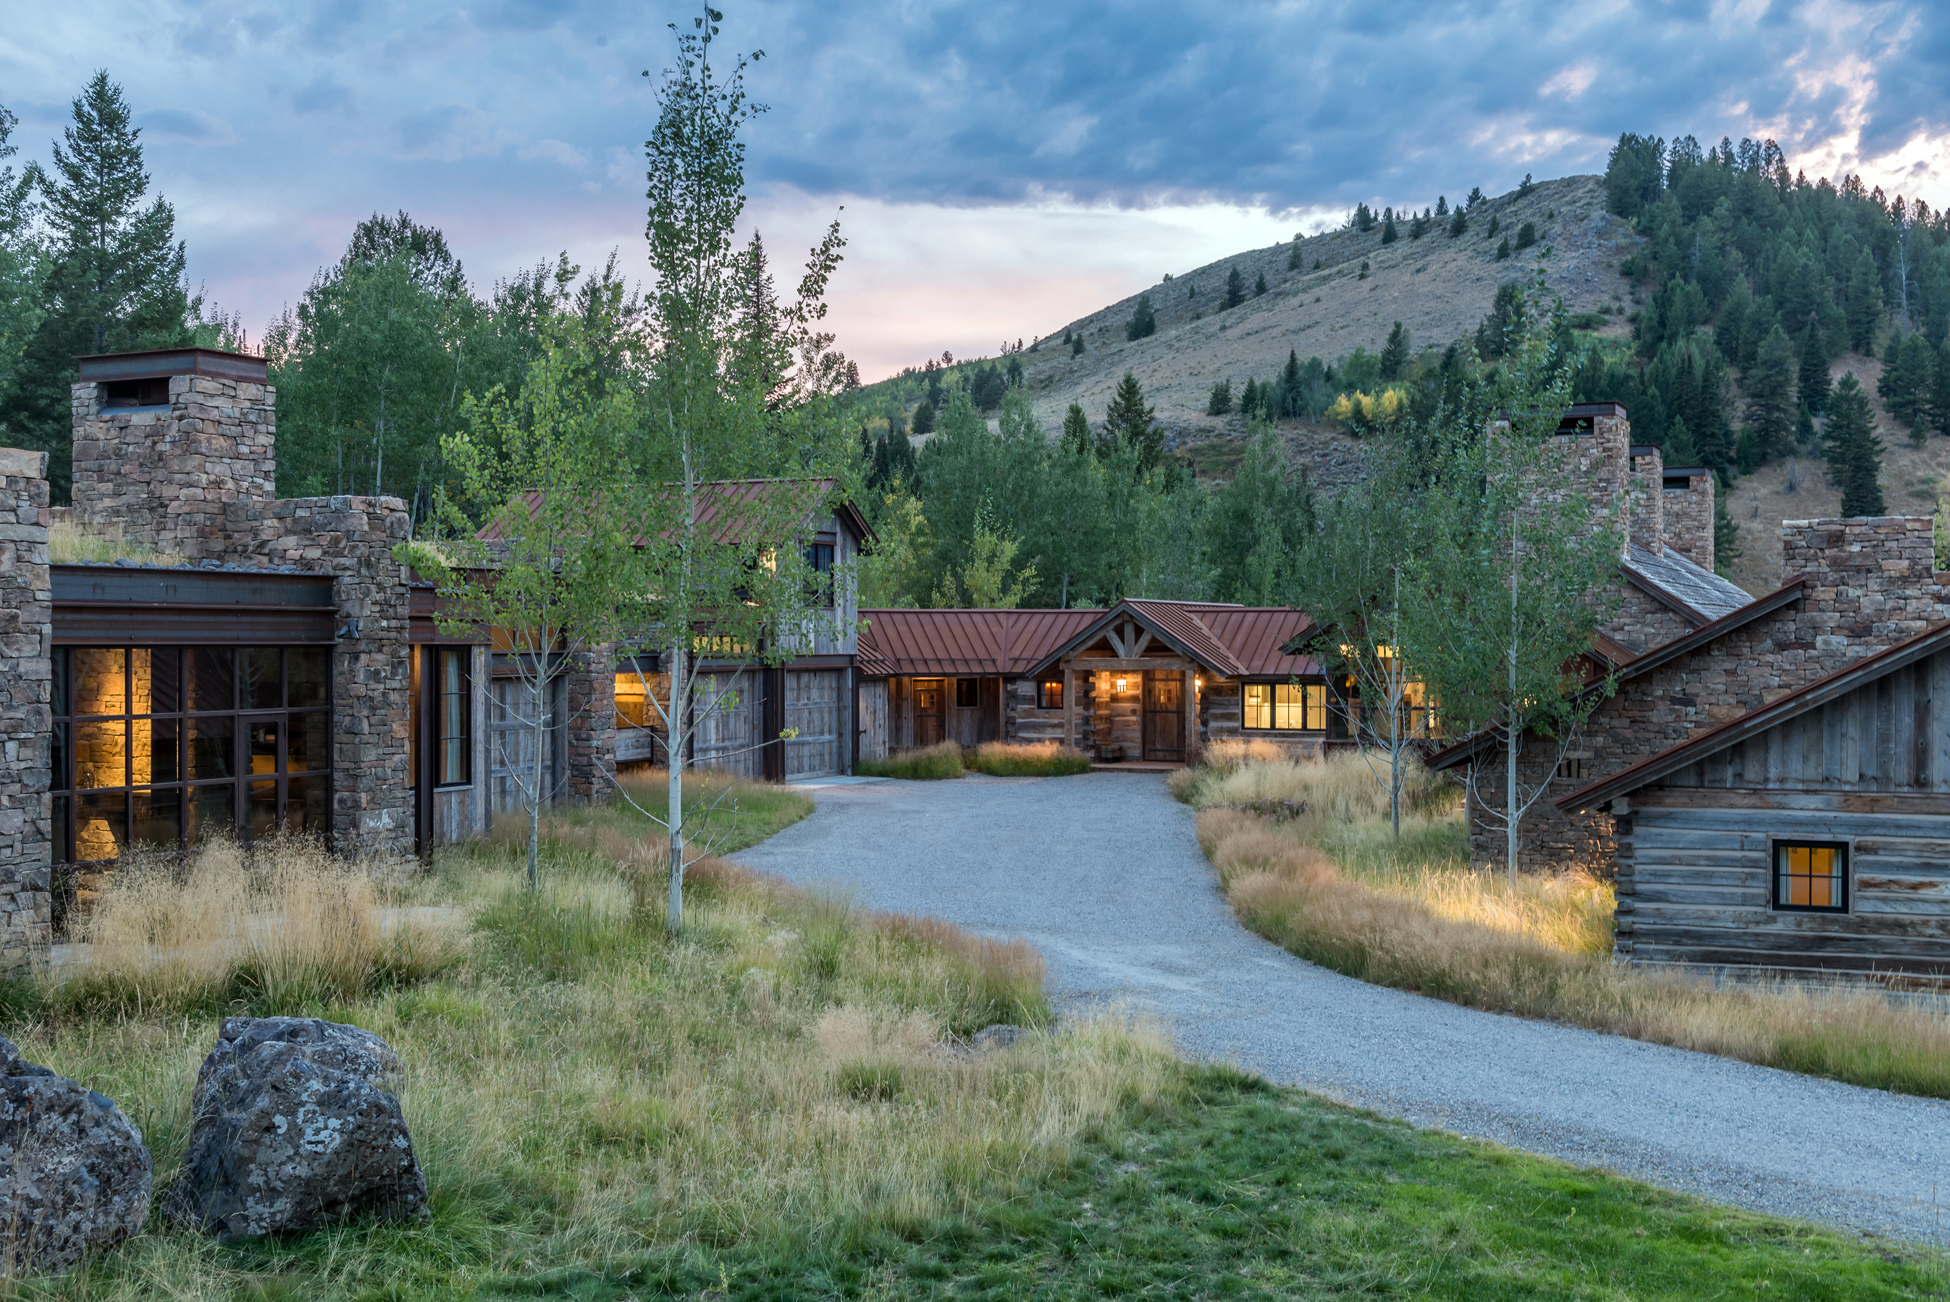 Recognized as a Top Architect as well as earning the prestigious Home of the Year award from Mountain Living, JLF Architects works throughout the Mountain West and beyond (photo by Audrey Hall).